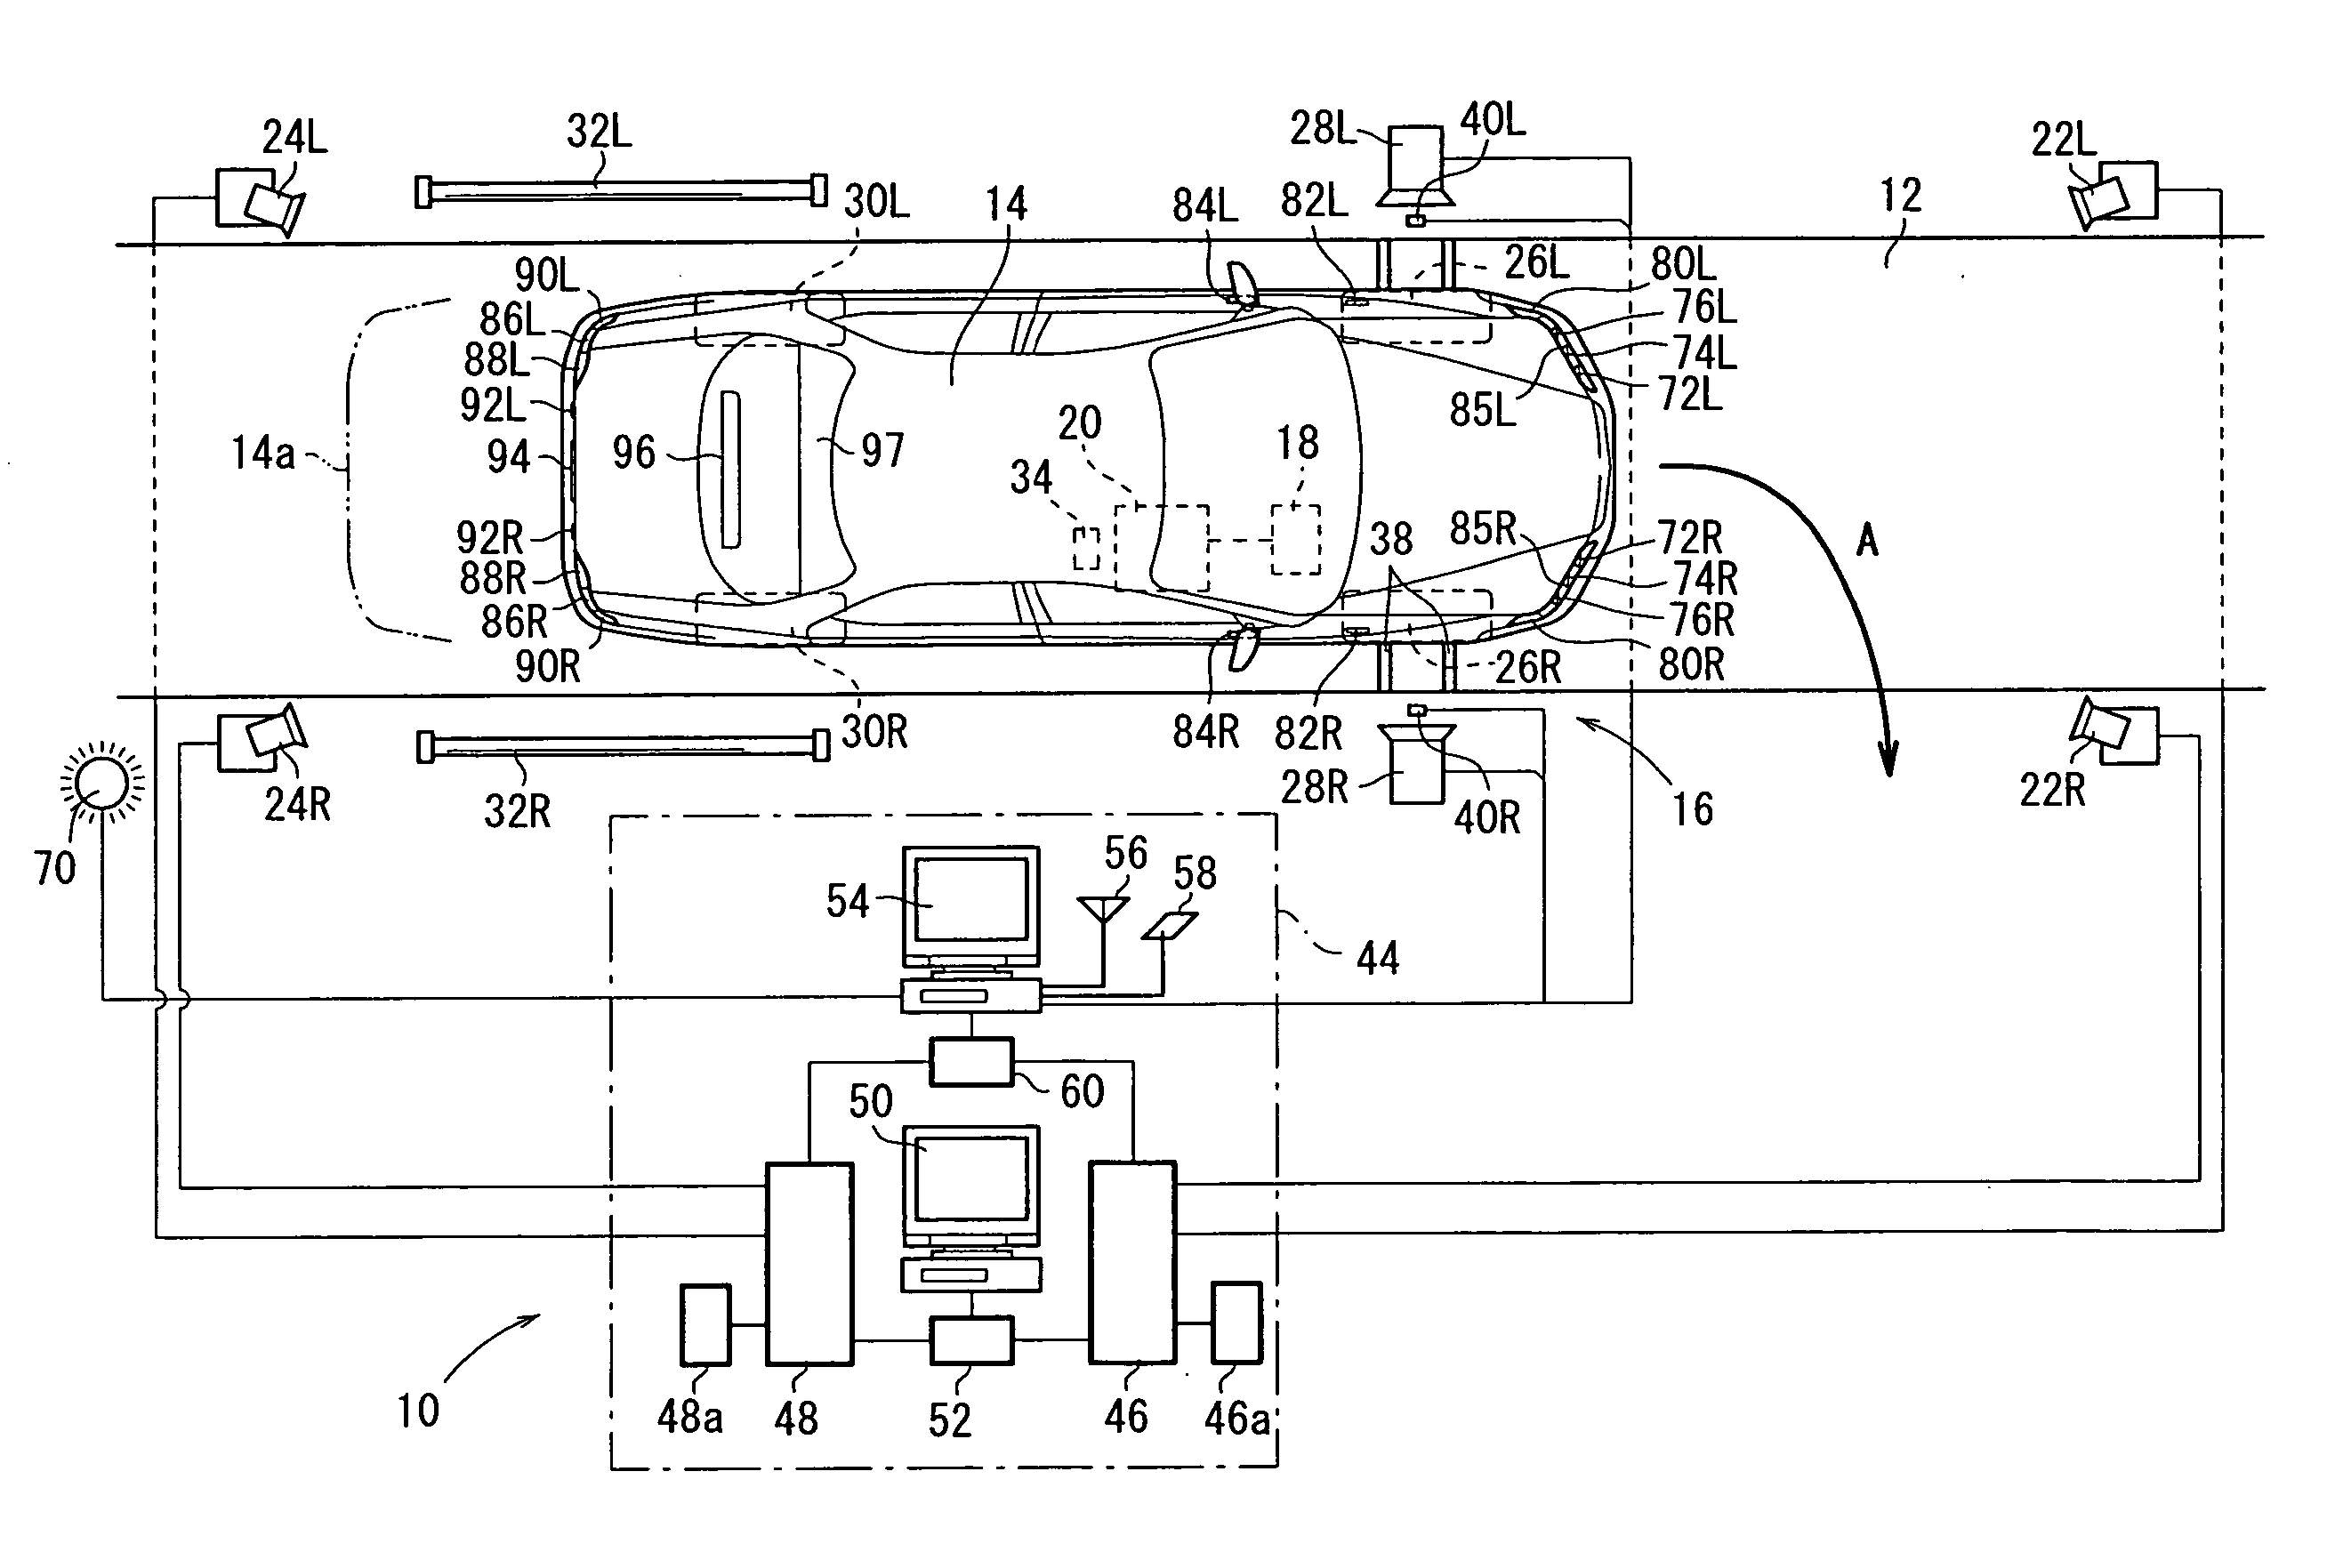 Vehicle Lamp Inspection Equipment and Inspection Method